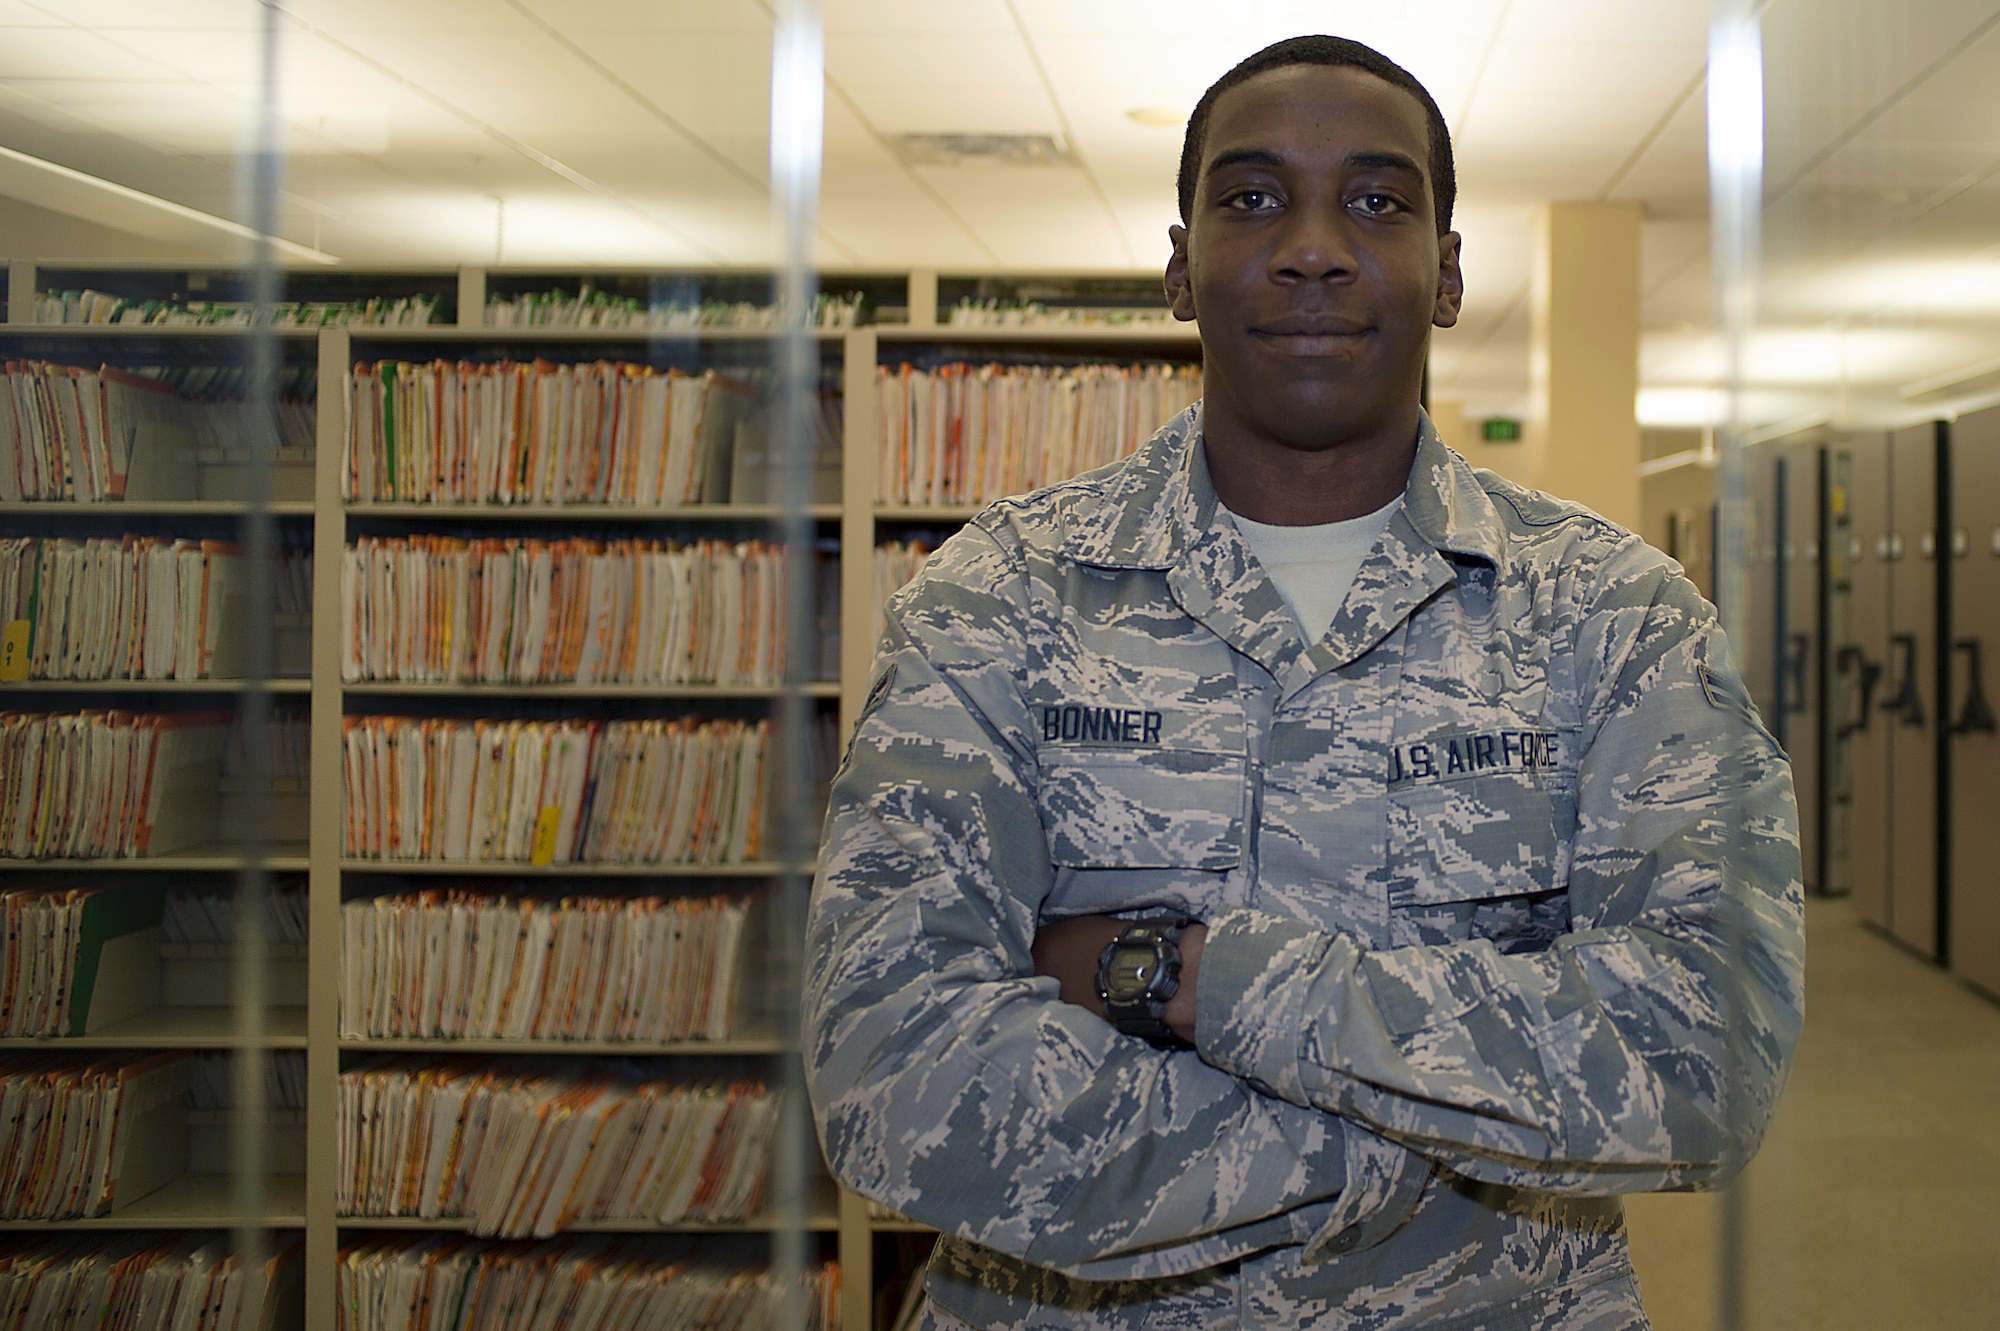 U.S. Air Force Airman 1st Class Amal Bonner, a records technician assigned to the 6th Medical Group, pauses for a photo at MacDill Air Force Base, Fla., July 25, 2017. Bonner grew up in Belize and moved to Chicago to join the Air Force in hopes of creating a better future for himself and his family. (U.S. Air Force photo by Airman 1st Class Caleb Nunez)